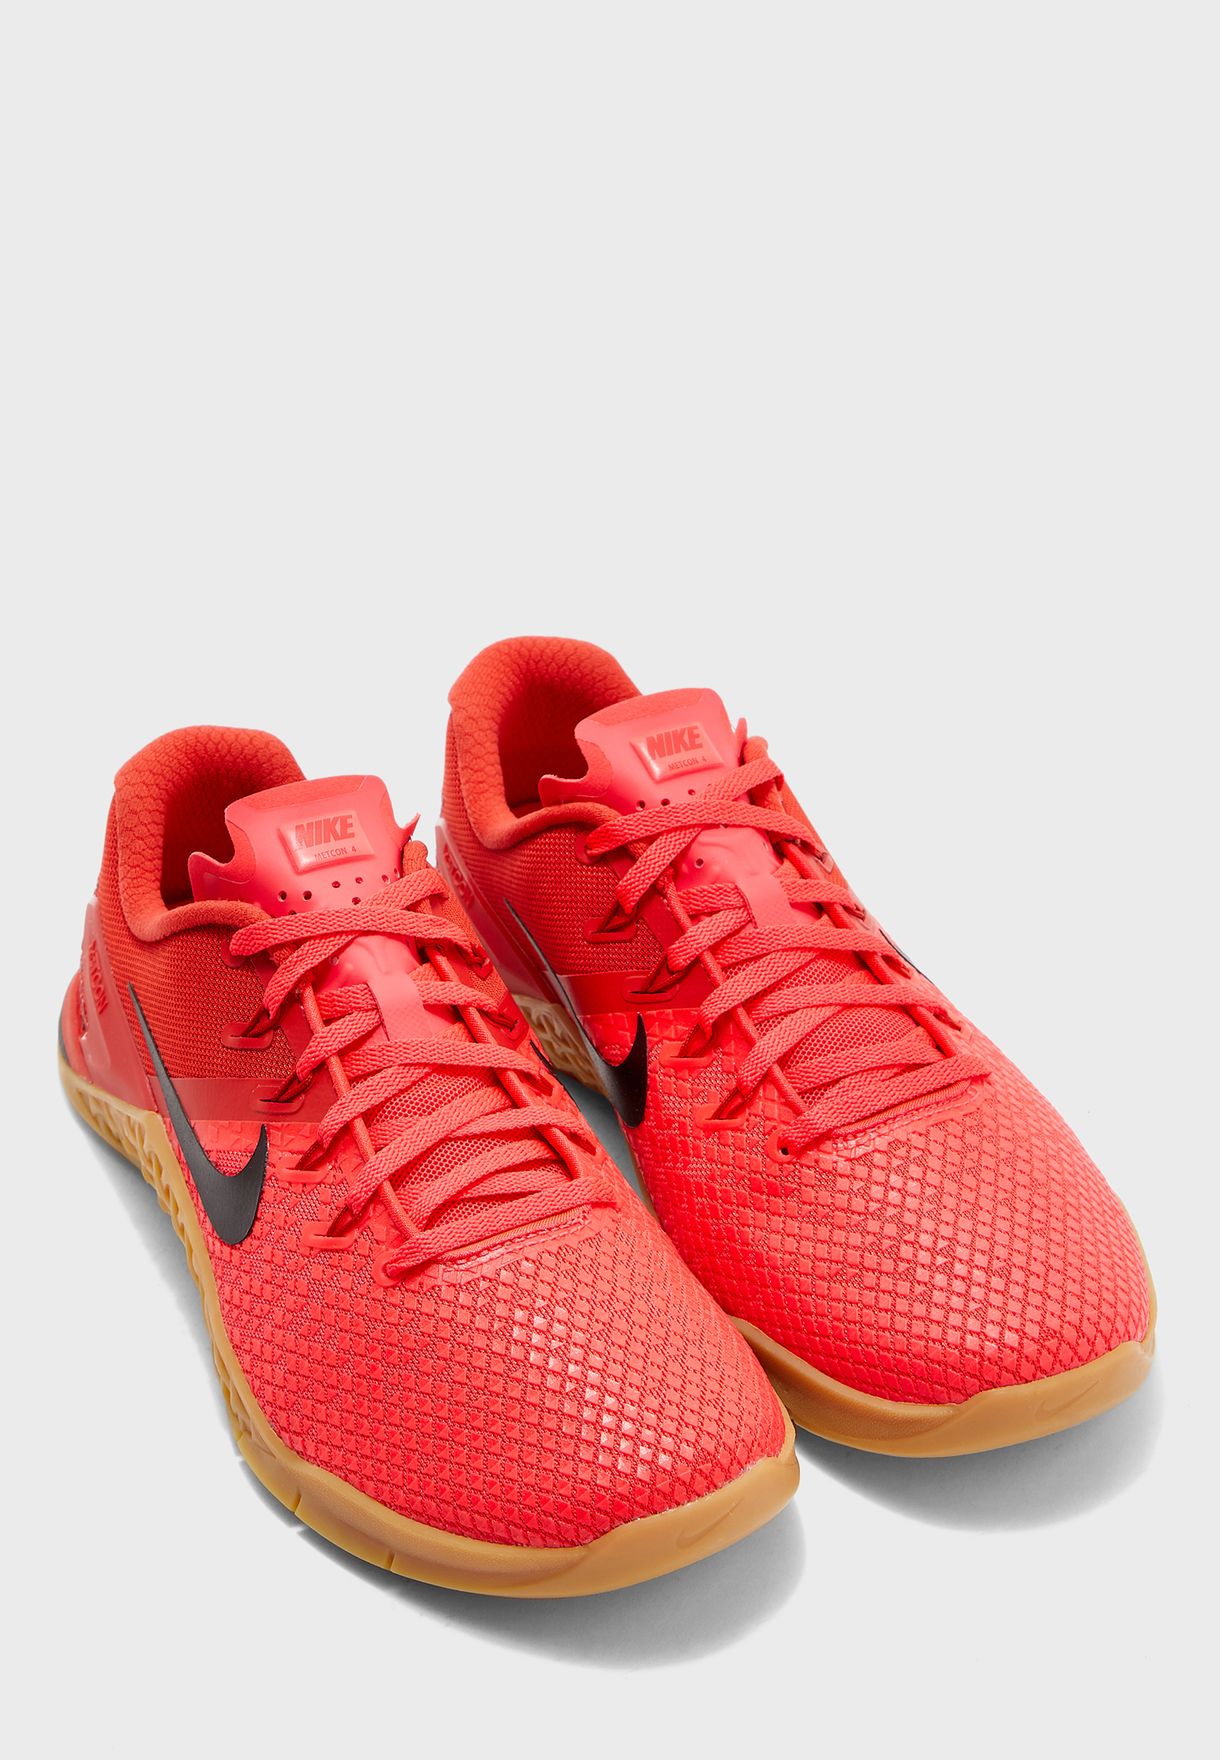 nike metcon 4 xd red